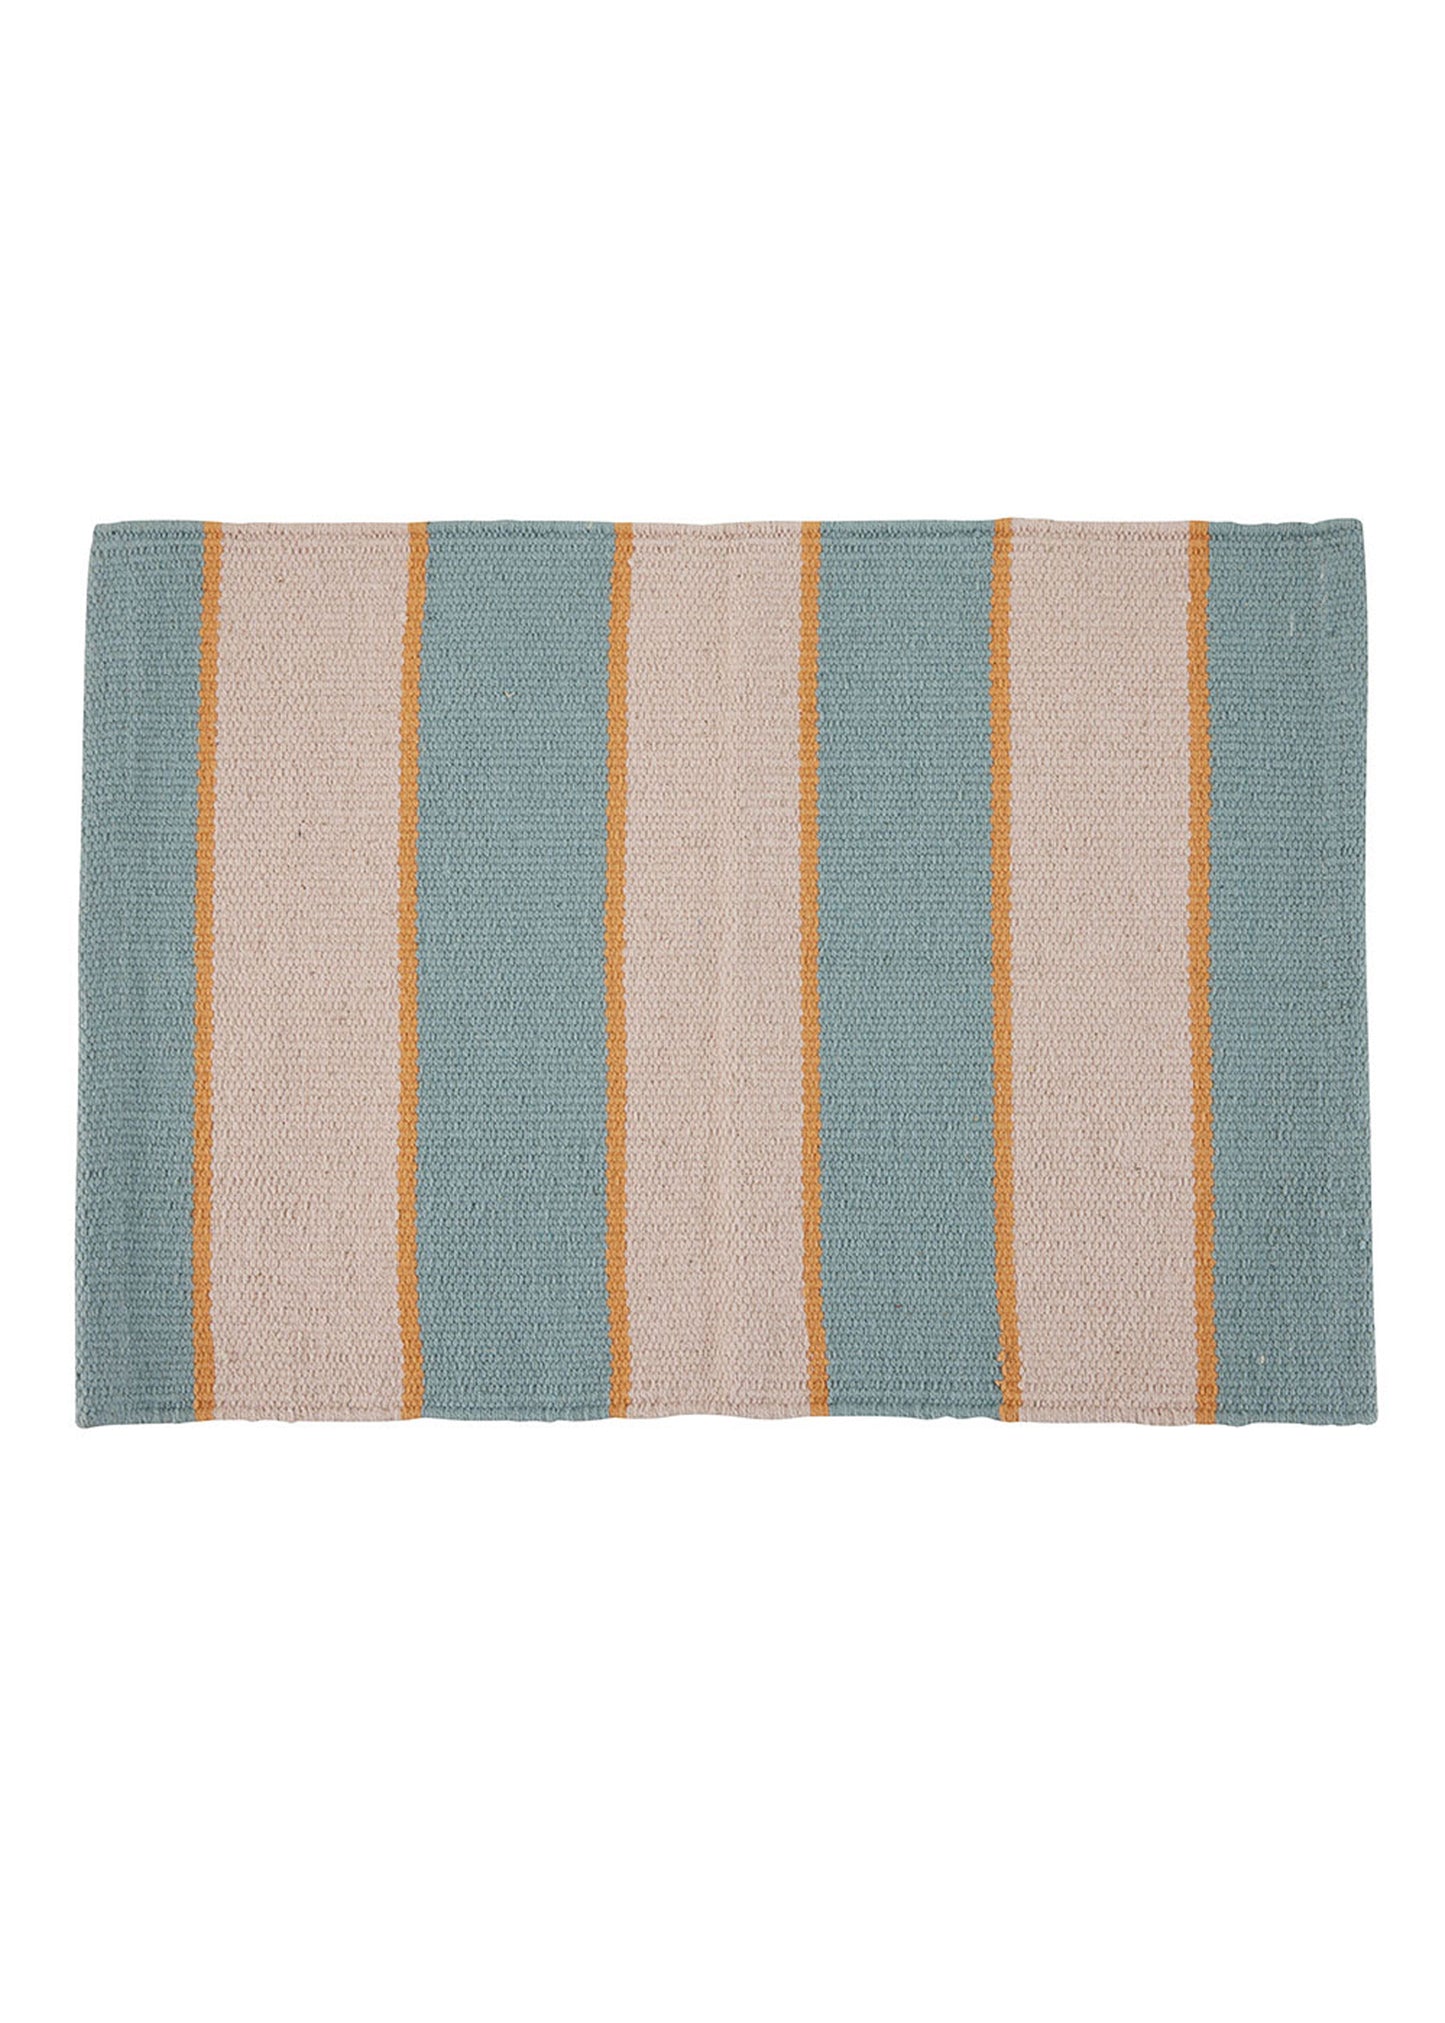 WOVEN STRIPE PLACEMAT, BLUE & PINK